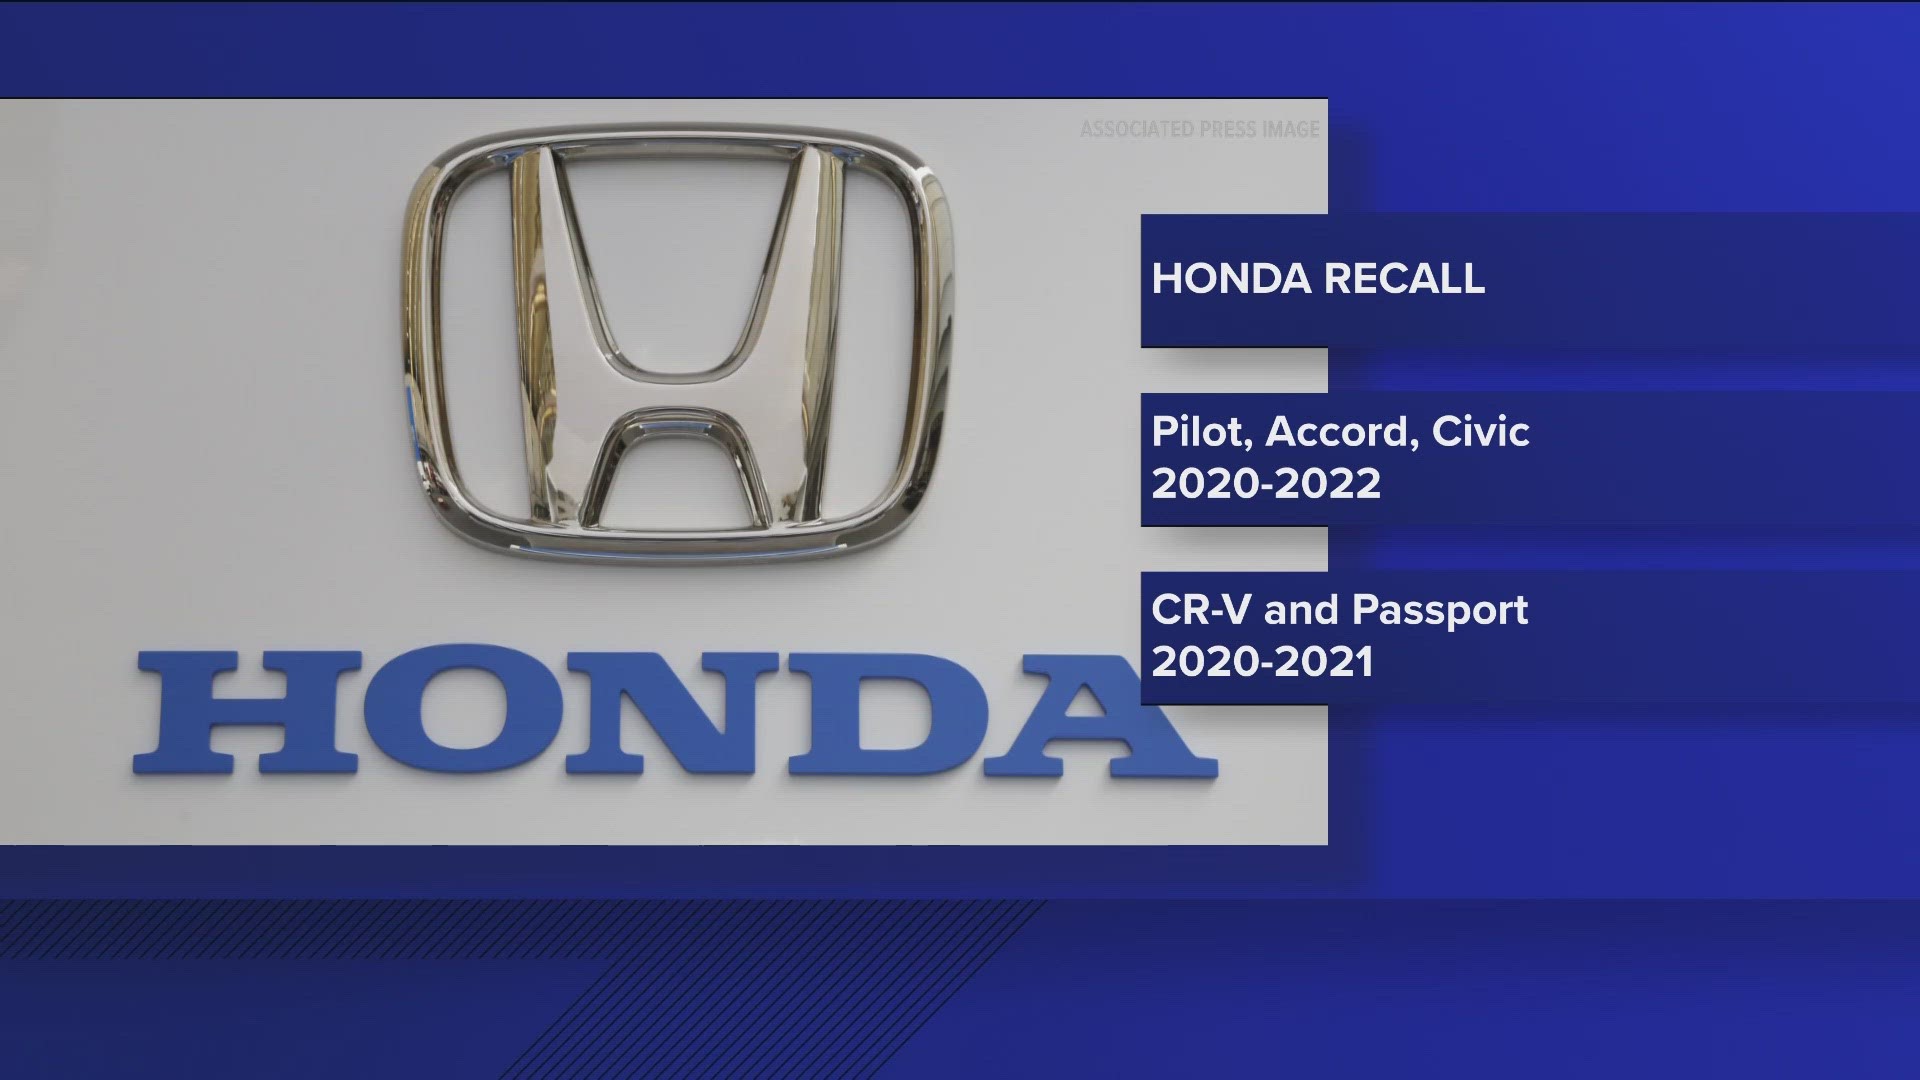 Honda issues recall on multiple 20, 21, and 22 models